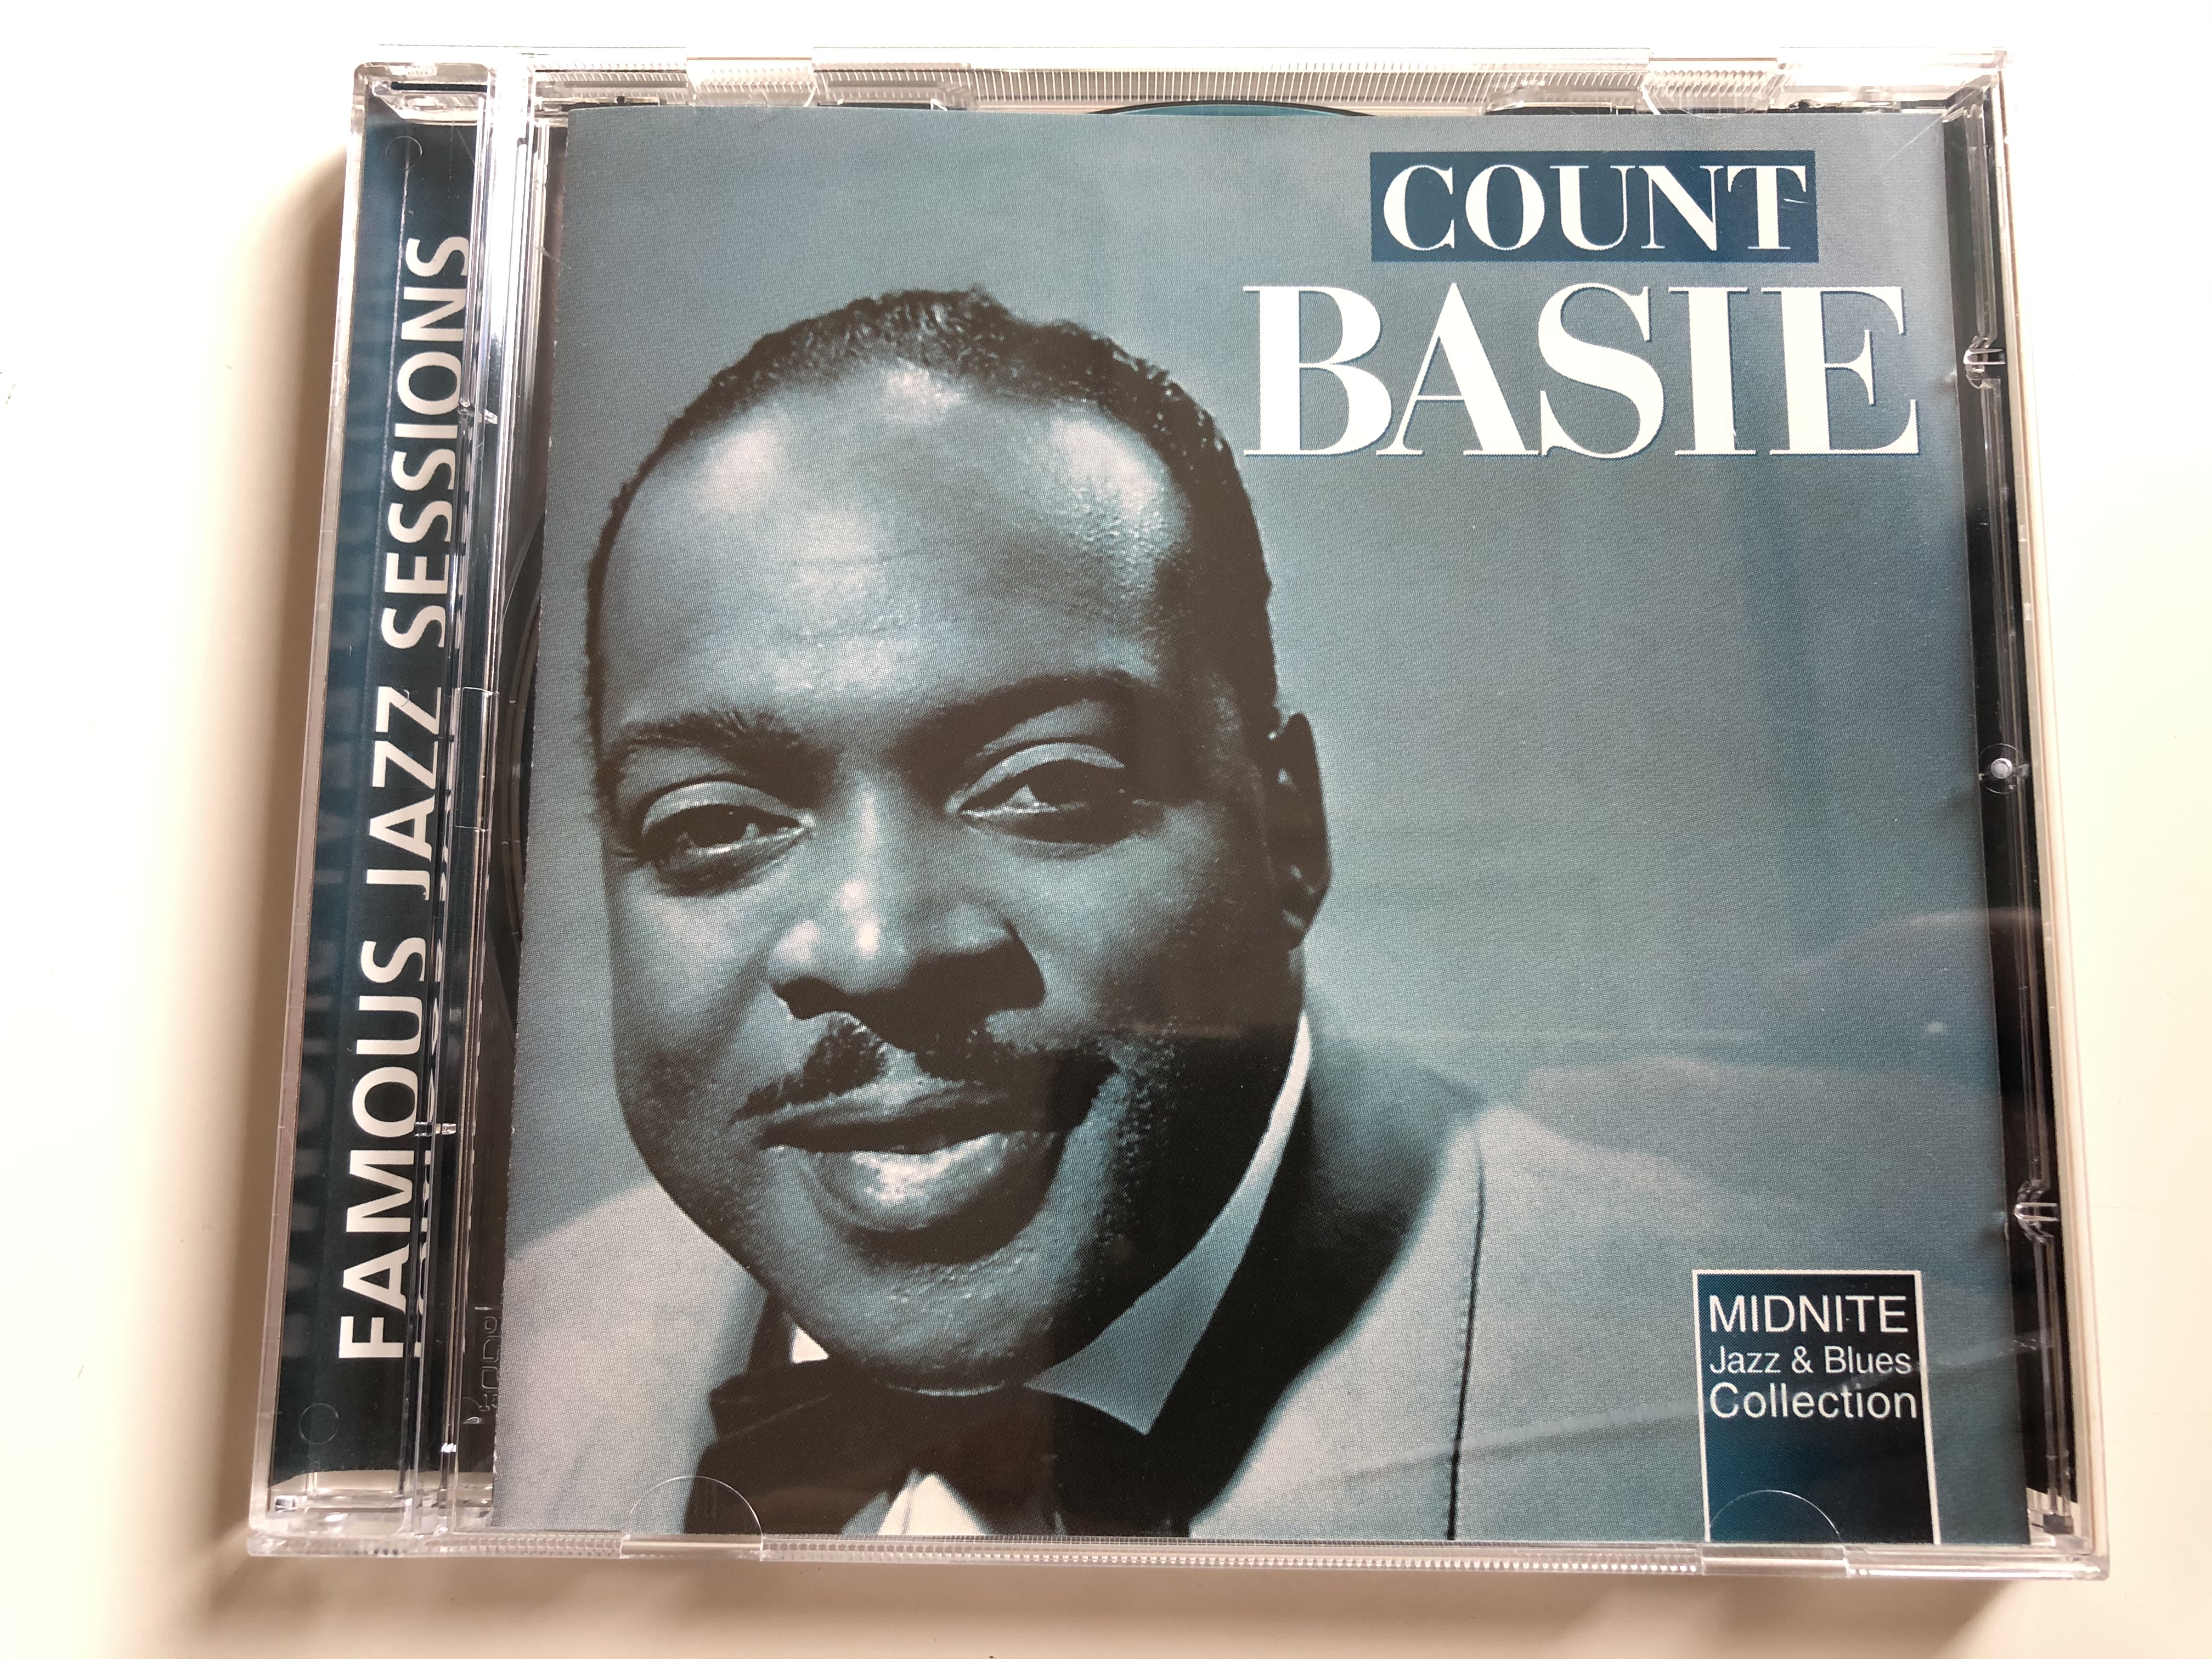 count-basie-famous-jazz-sessions-midnite-jazz-blues-collection-audio-cd-2000-mjb005-1-.jpg